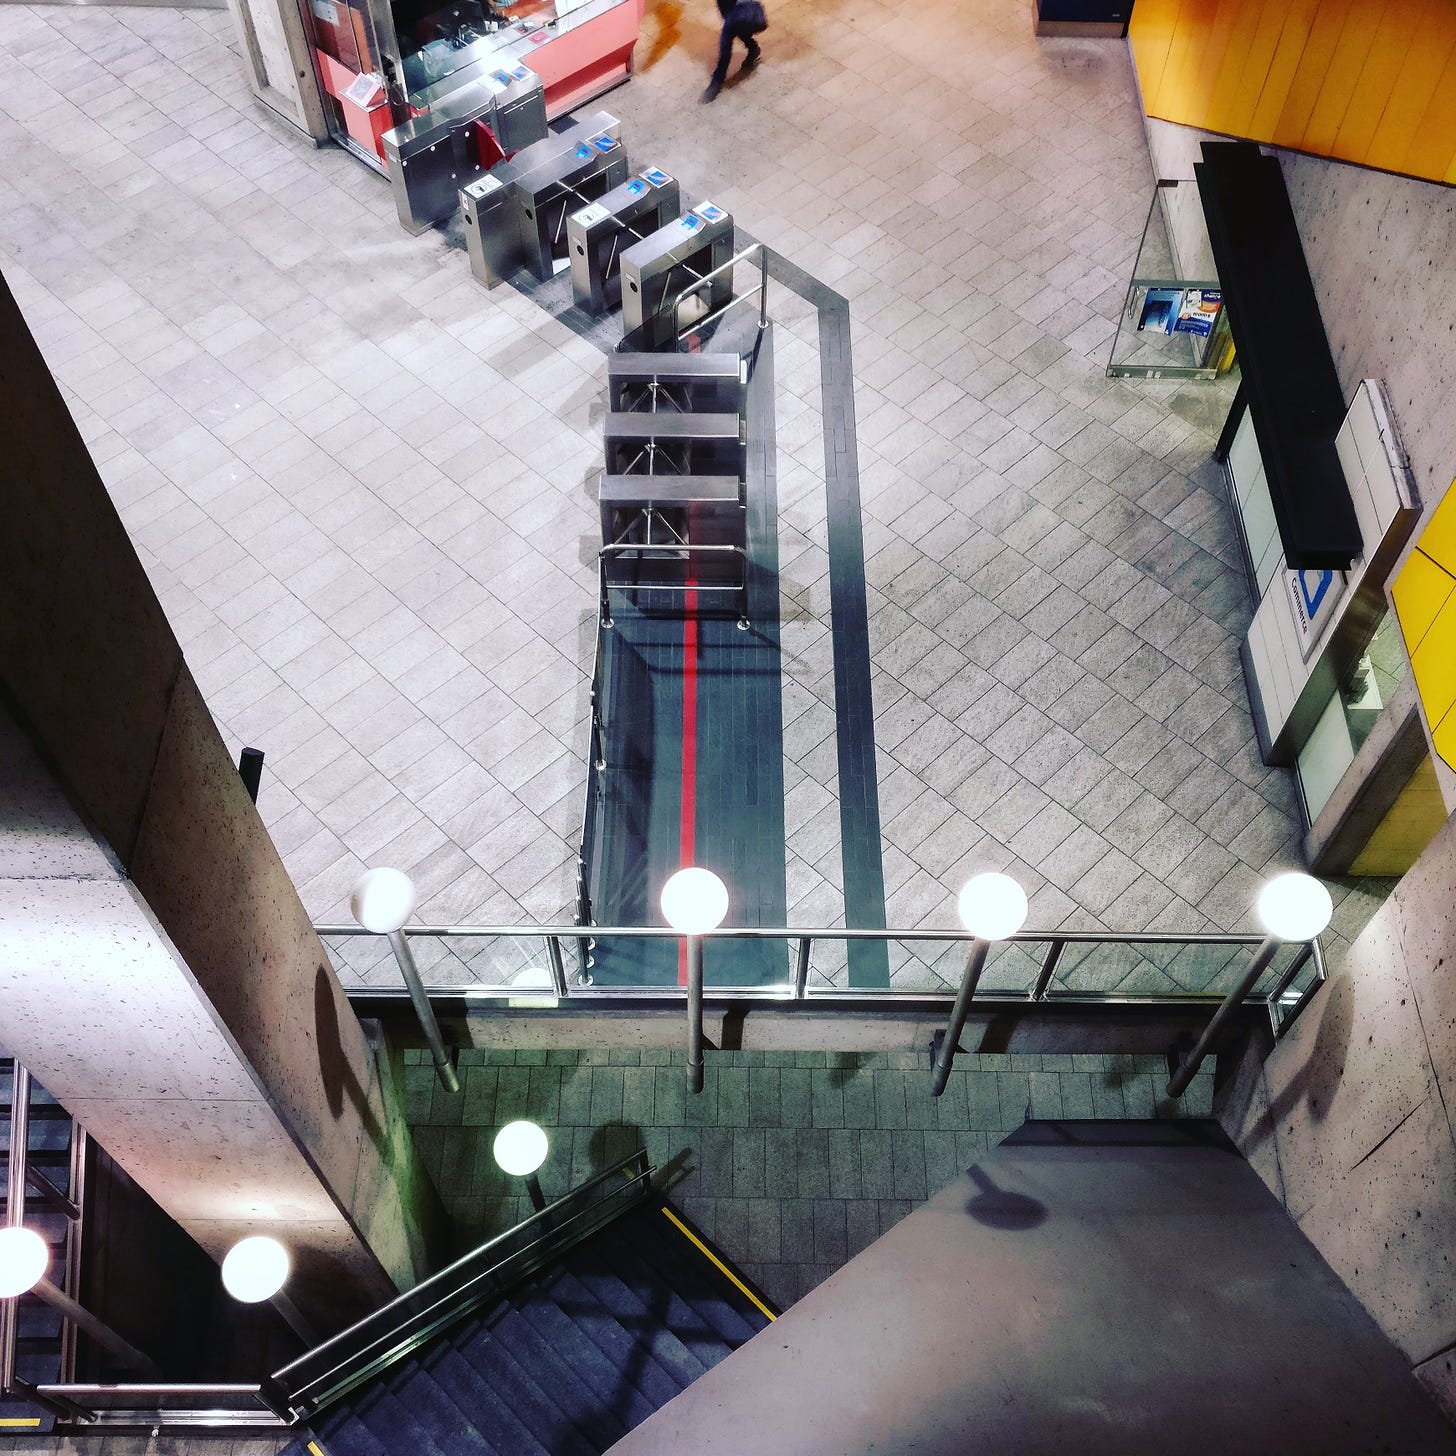 An empty subway station in Montreal, shot from the entrance, looking down at the turnstiles. The legs of a single person are visible at the top of the frame